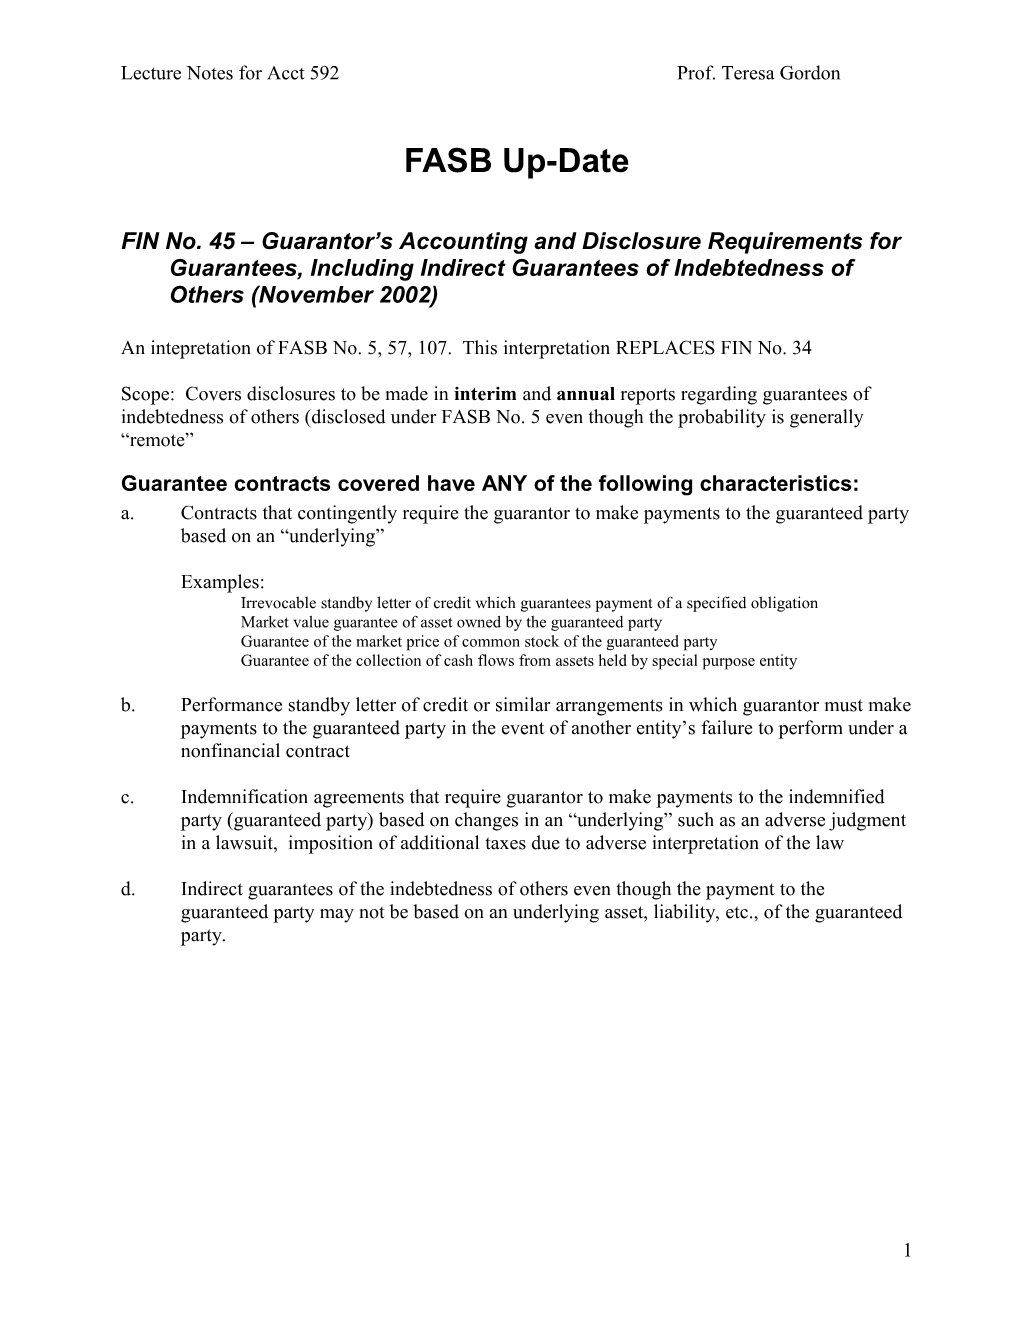 FASB Up-Date for FIN 45